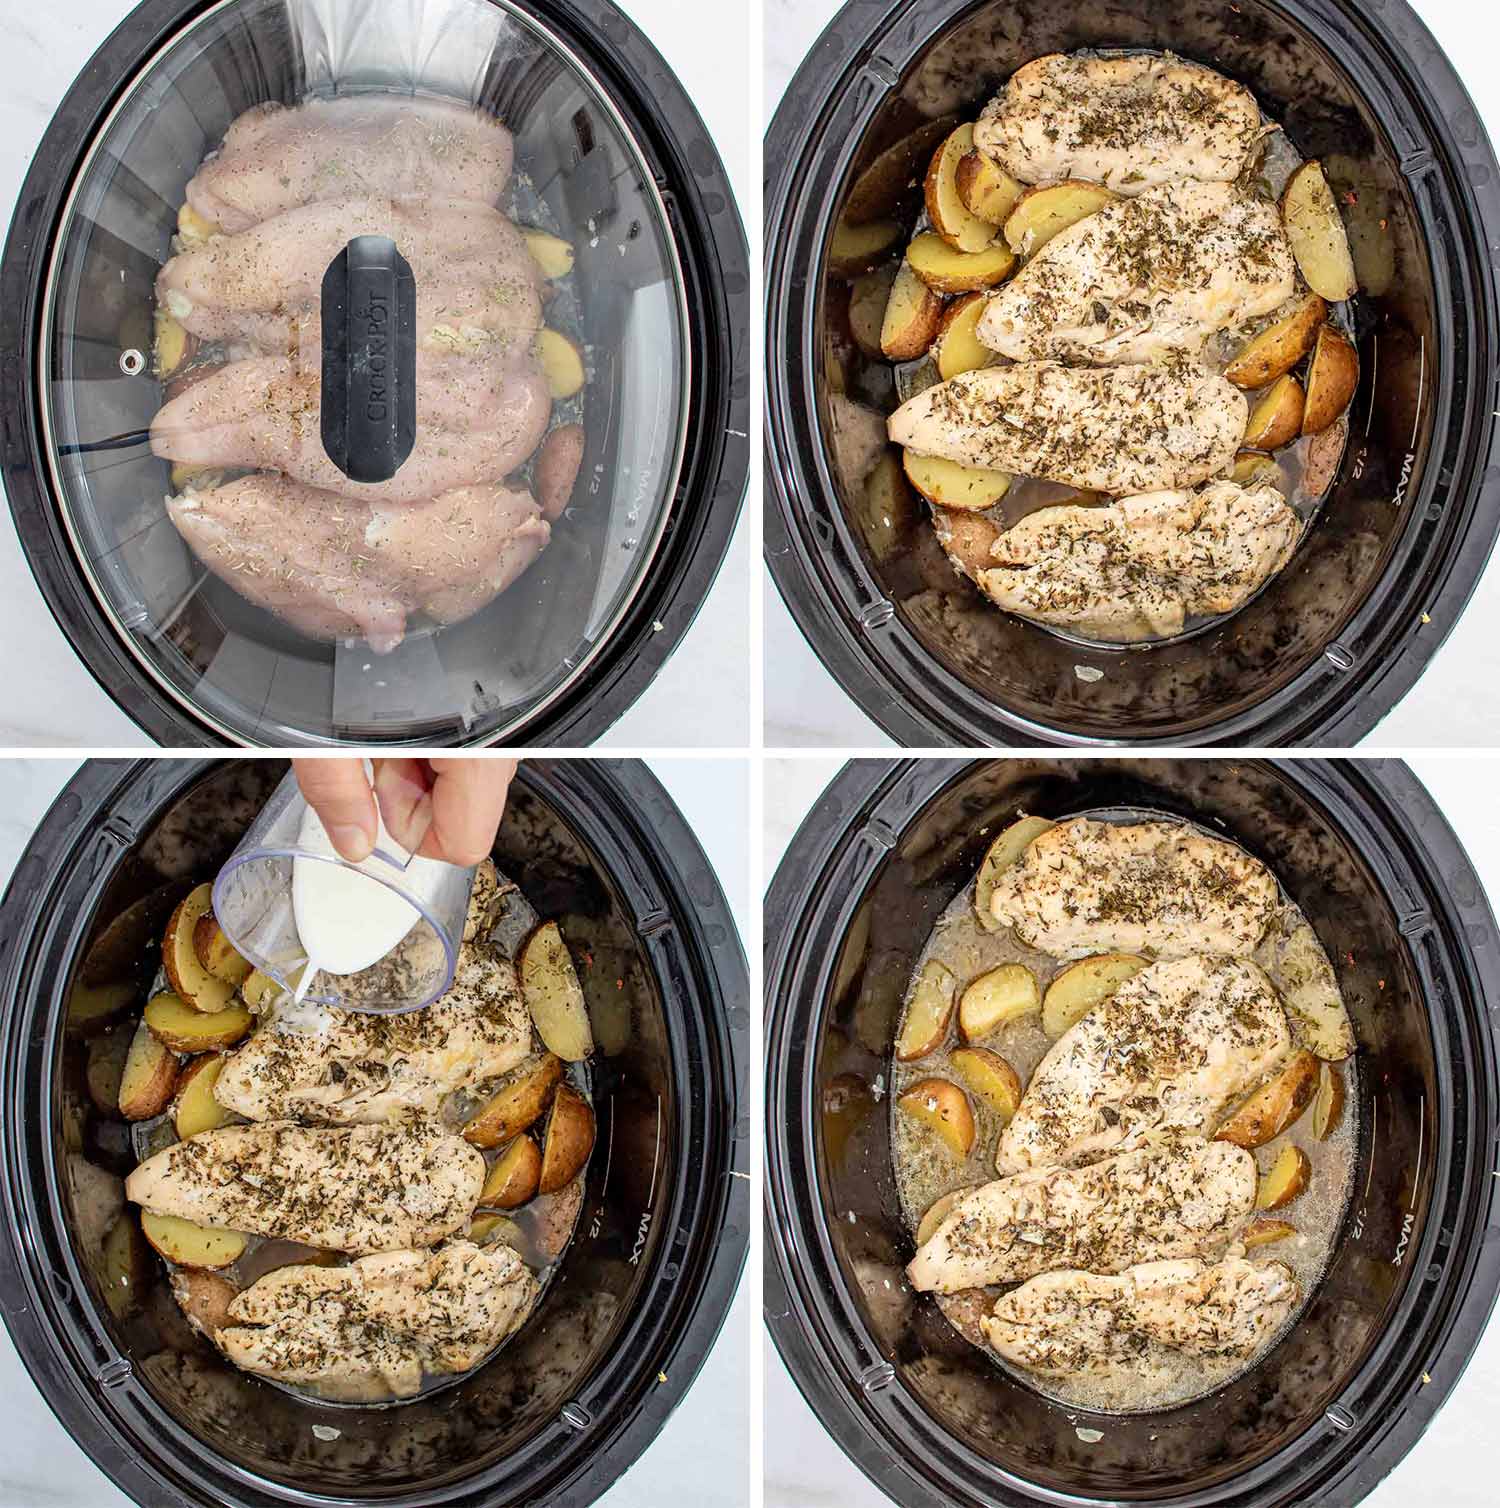 process shots showing how to make crockpot chicken and potatoes.